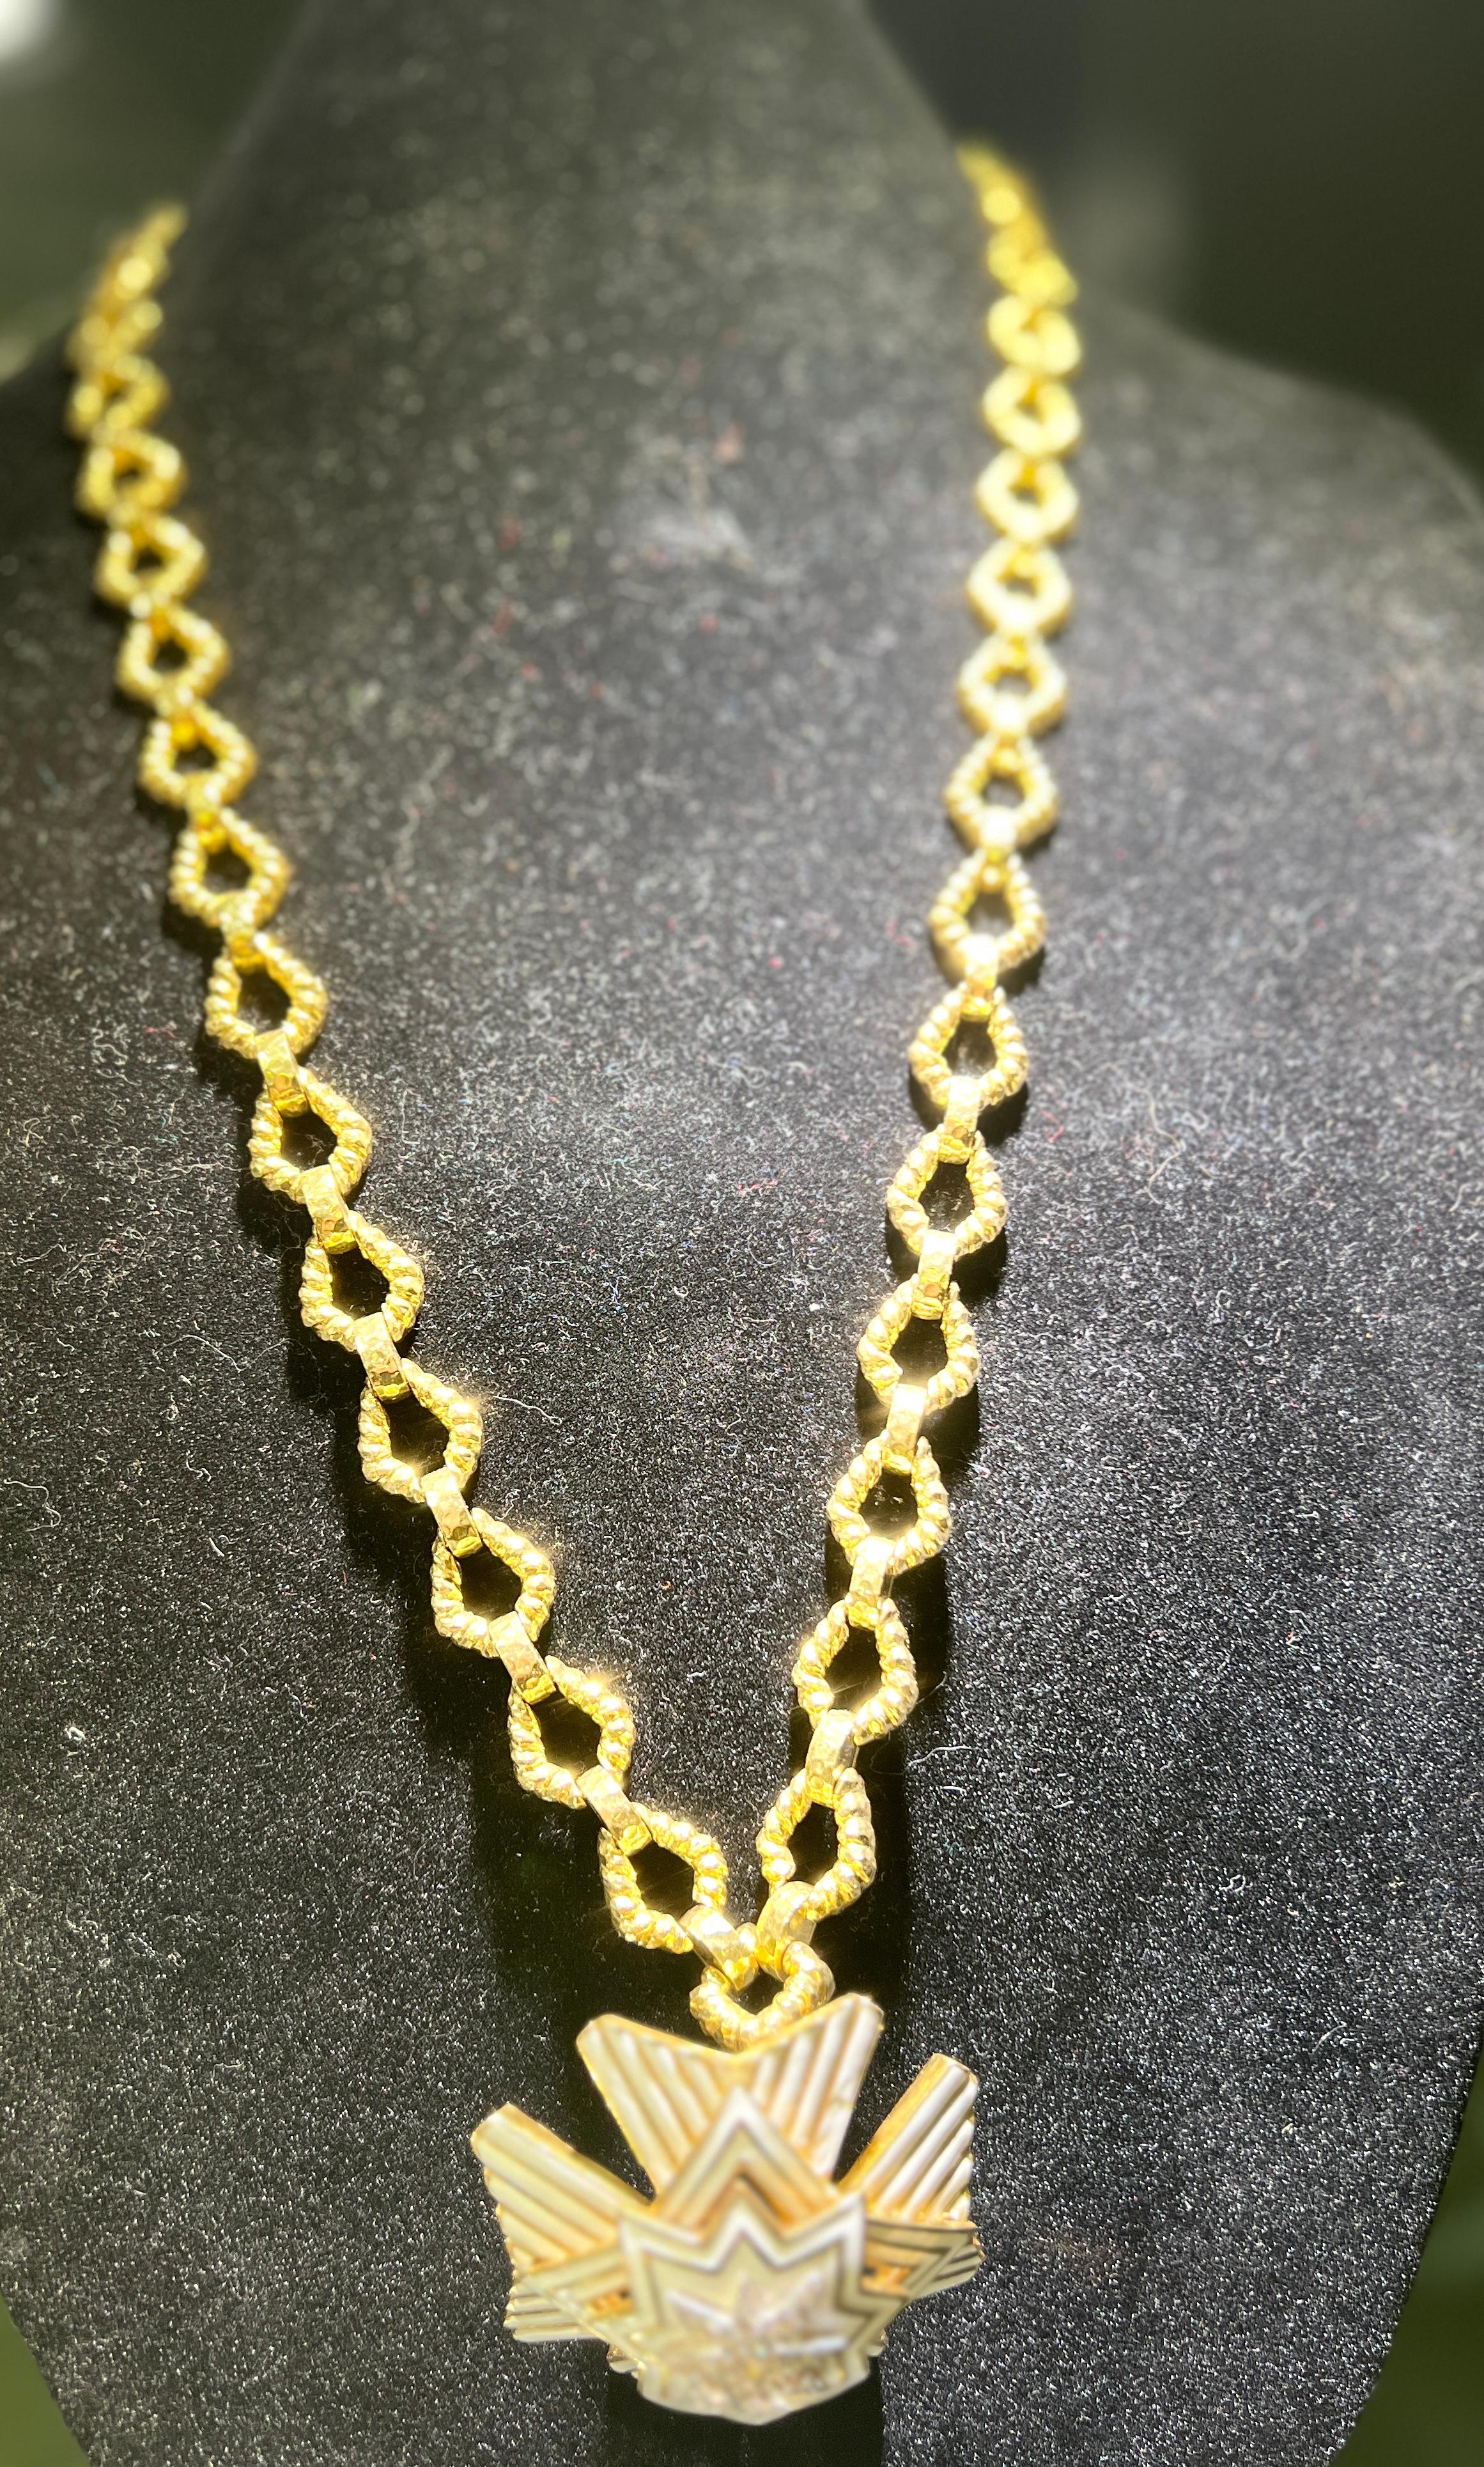 This exceptional necklace is the perfect addition to any jewelry collection. Its the perfect item to help you wear all of the stunning brooches sitting in your jewelry box you are not wearing.

This hammered gold necklace has removable sections to